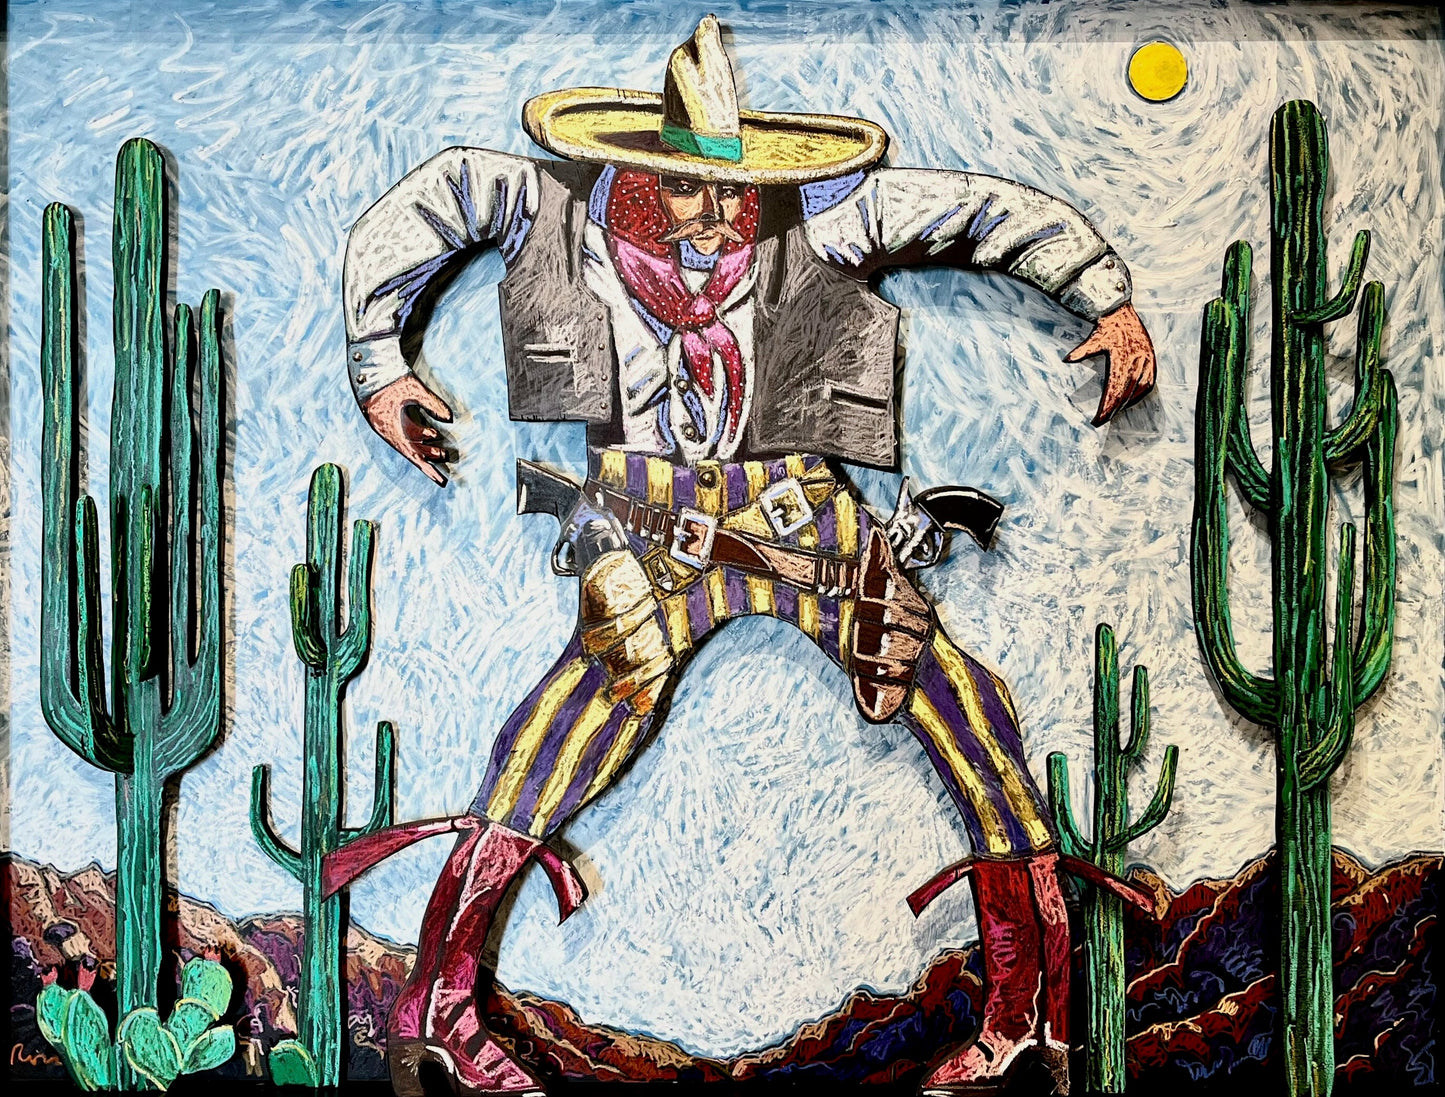 Gunfighter with Cactus-Painting-Thom Ross-Sorrel Sky Gallery